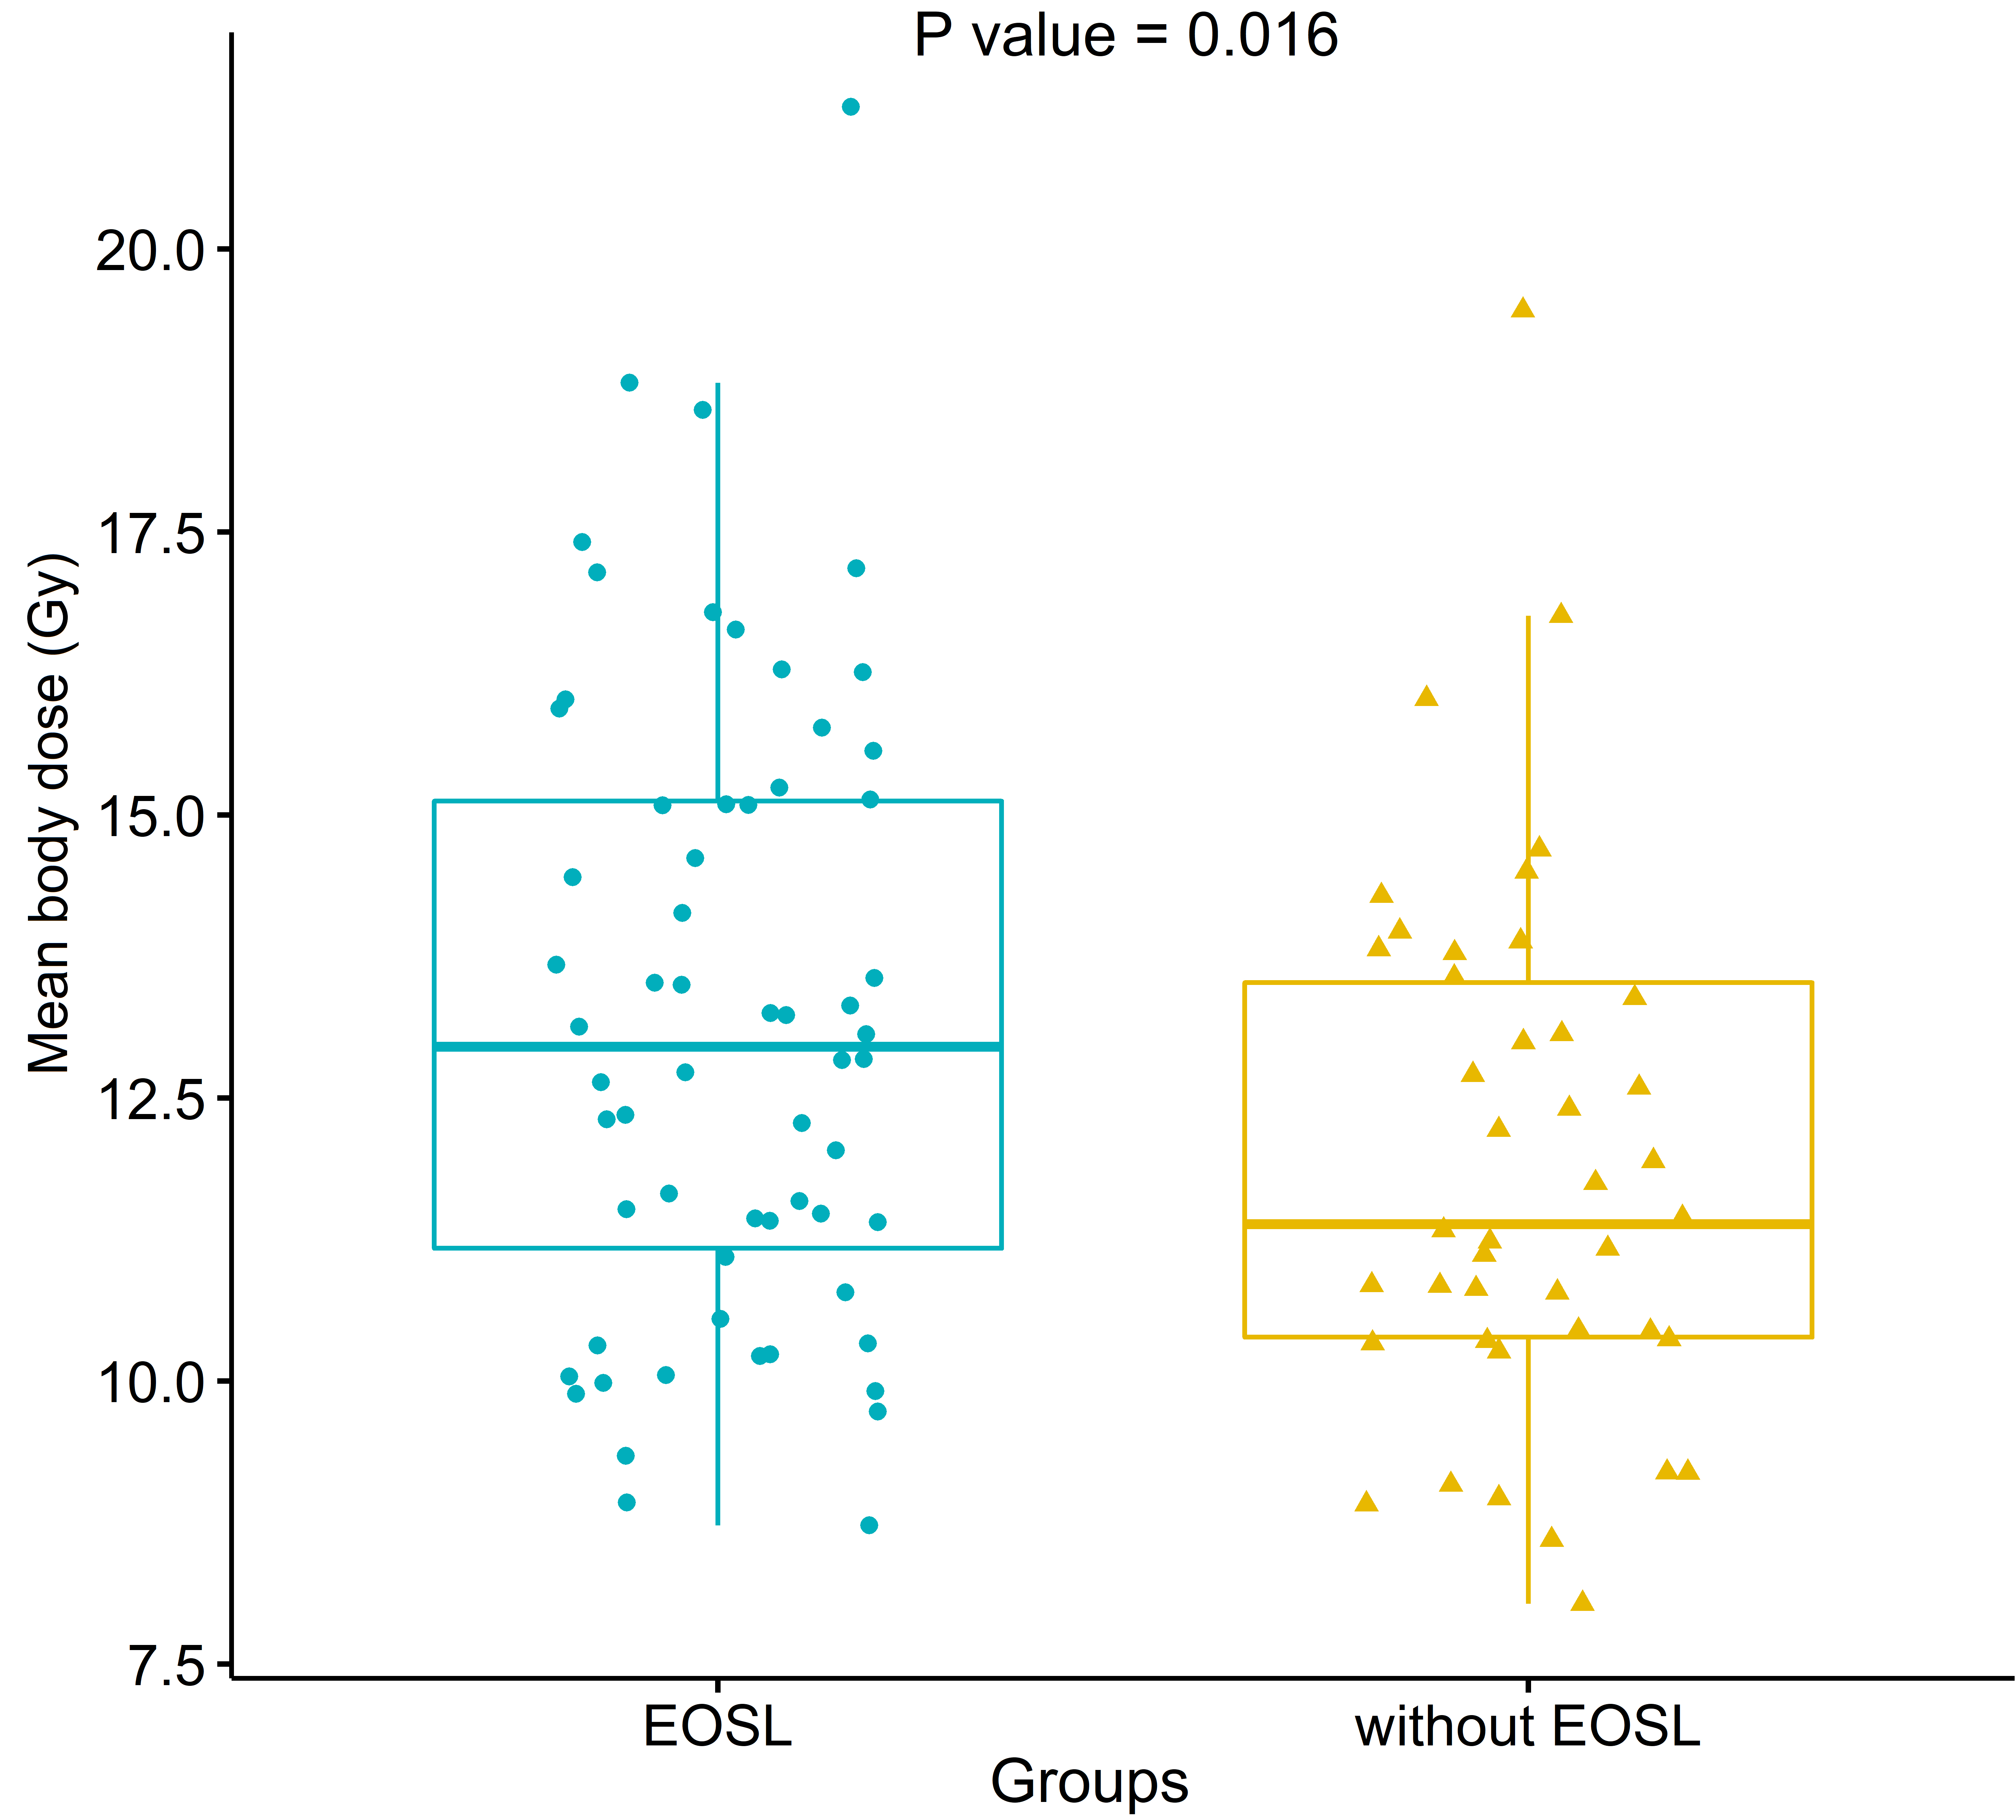 The comparison of mean body dose (MBD) between patients with or without early onset of severe lymphopenia (EOSL). Patients with EOSL had higher MBD (mean ± standard deviation, 13.2 ± 2.8 Gy, N= 62) than those without EOSL (11.9 ± 2.4 Gy, N= 42; P= 0.016).